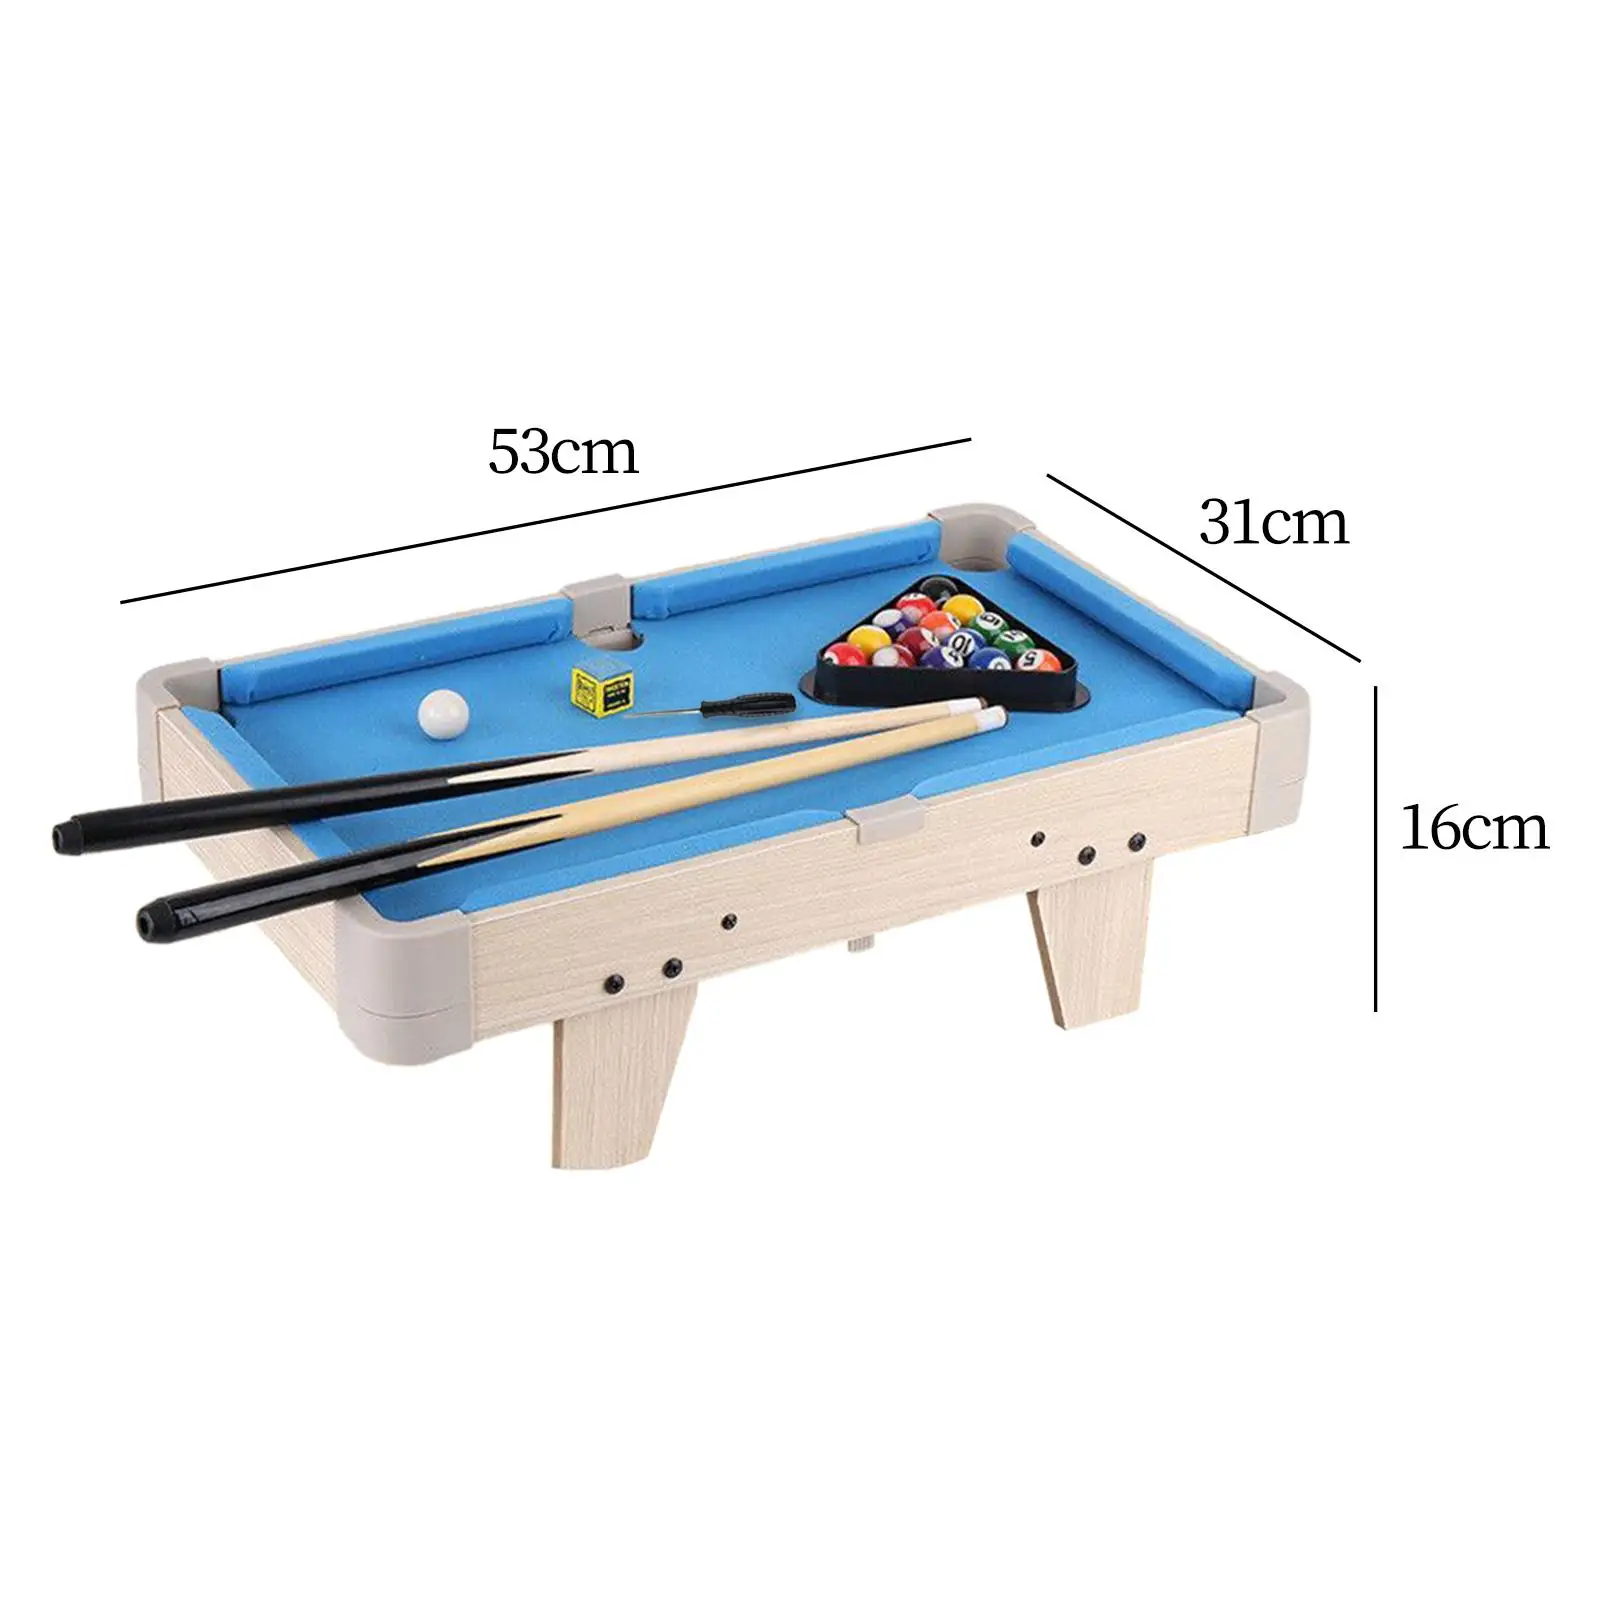 Pool Table Set Leisure Portable Tabletop Billiards Game for Children Adults